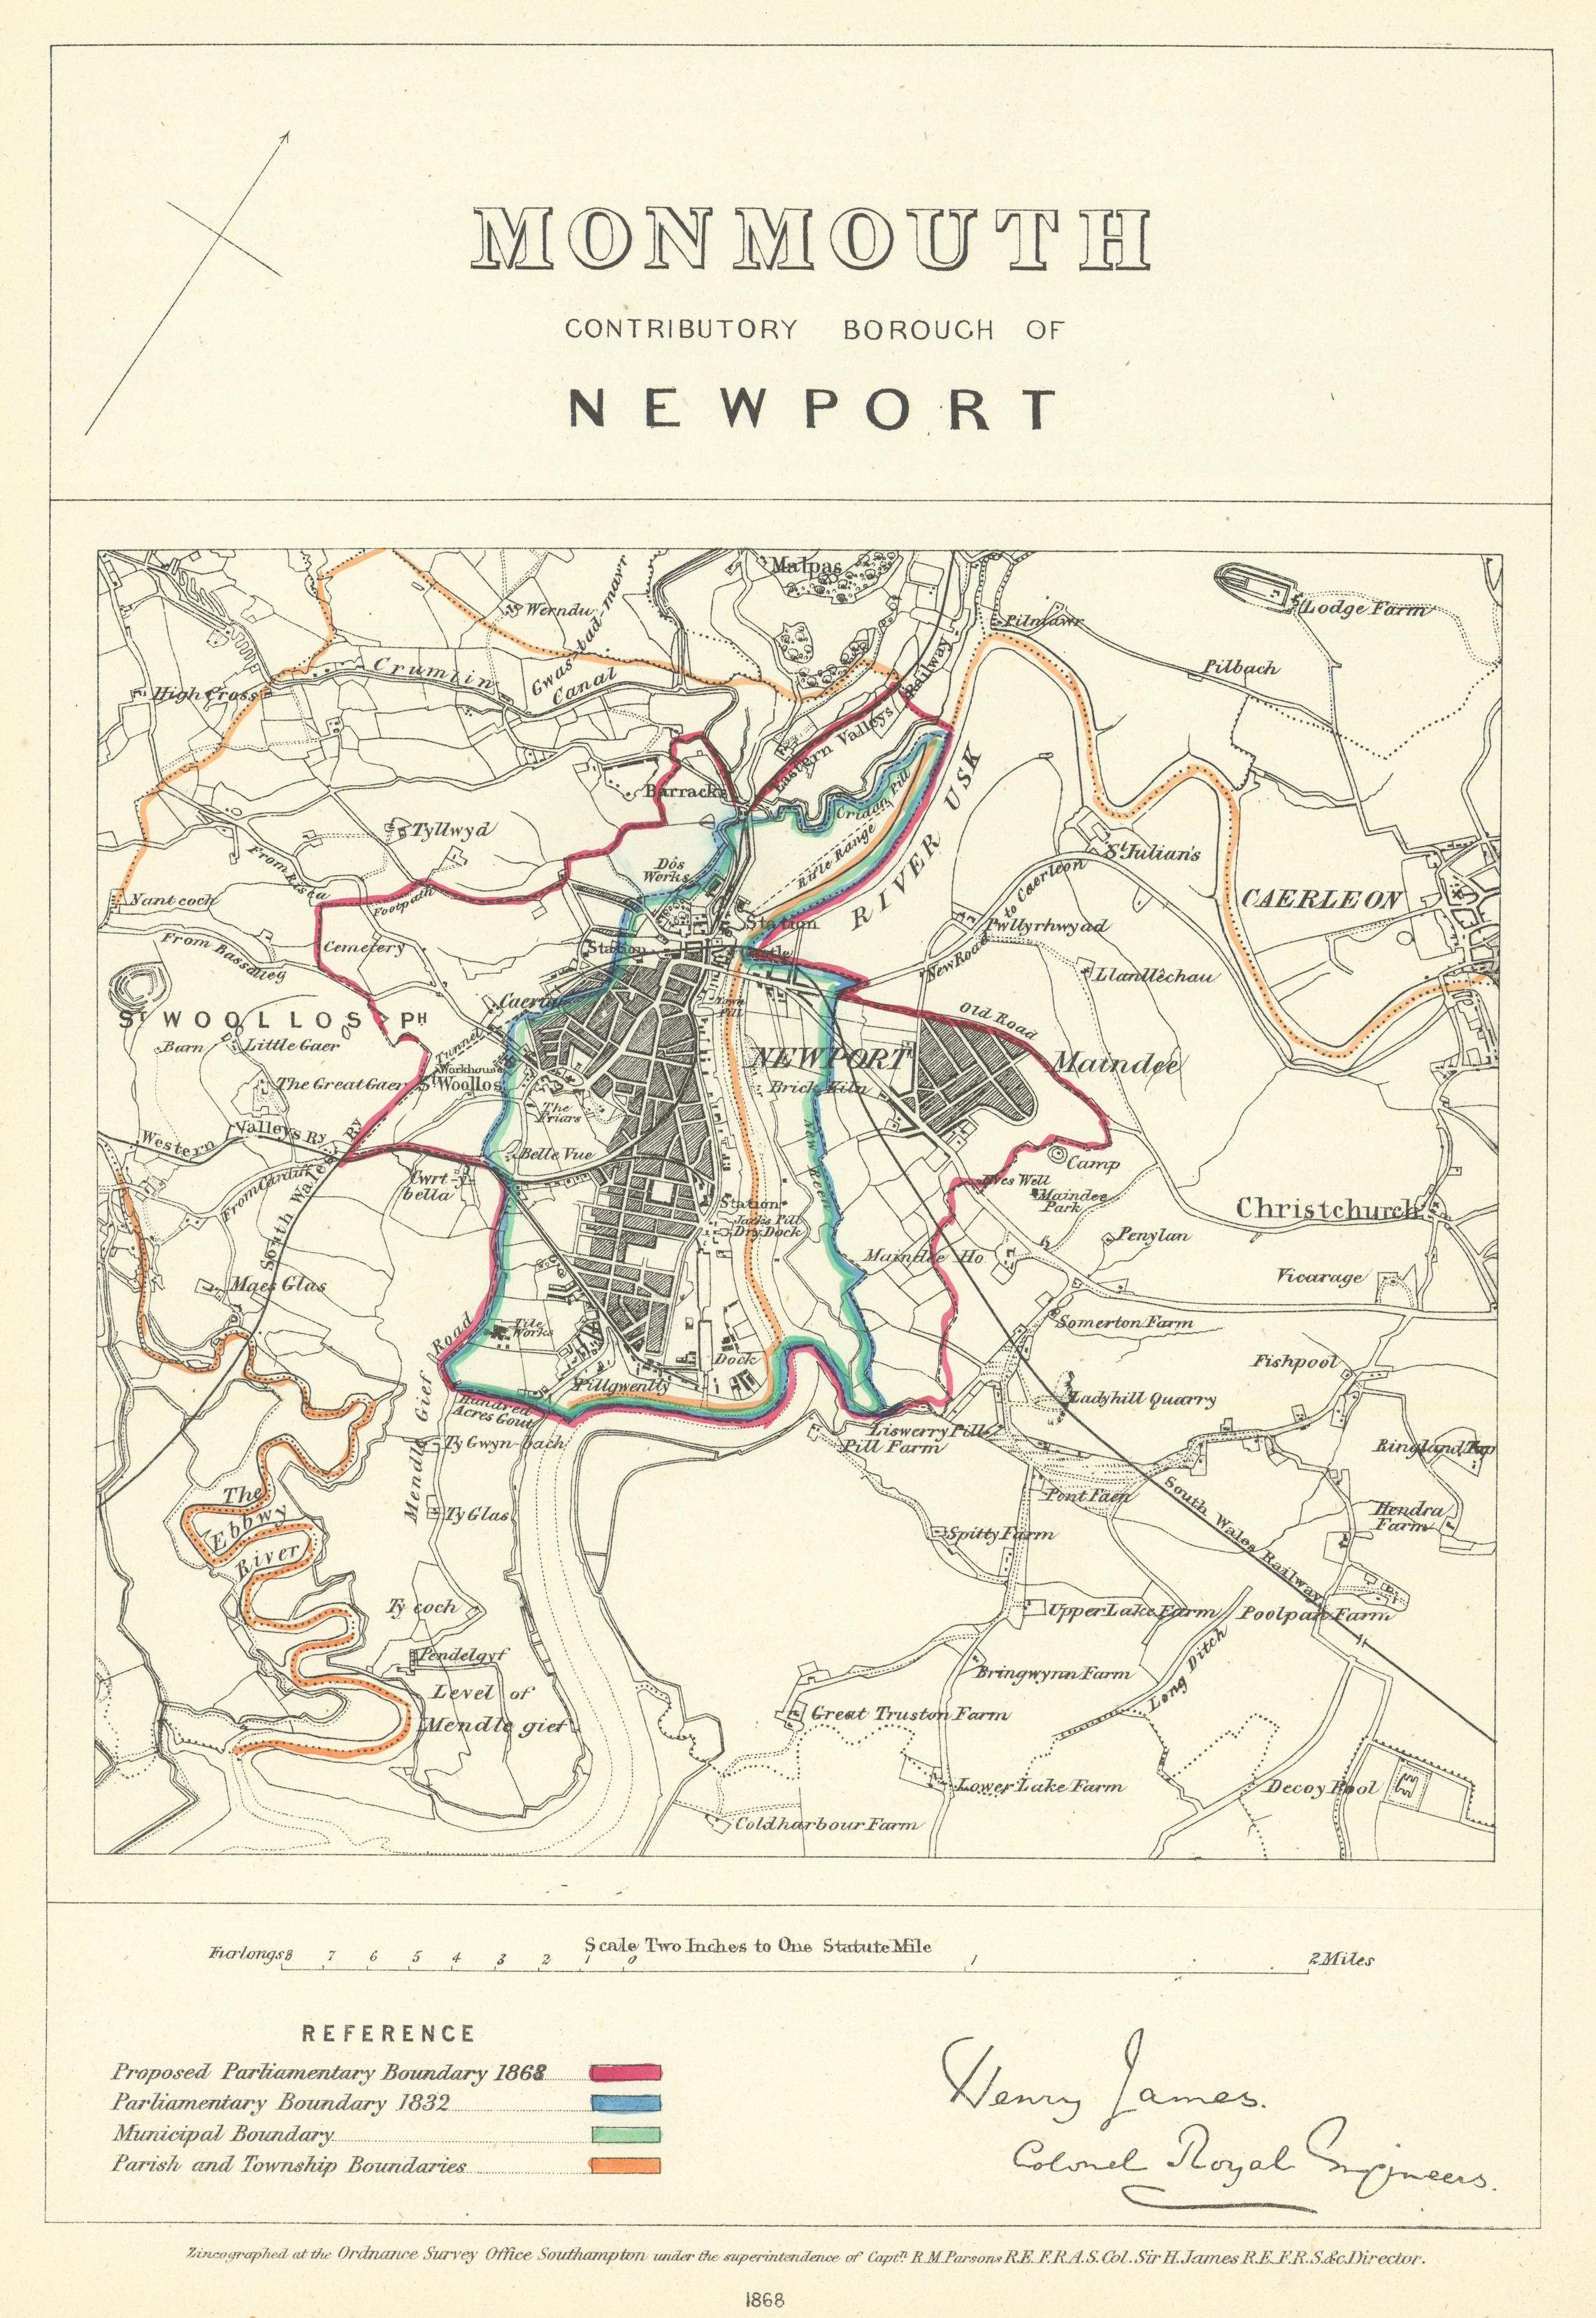 Associate Product Monmouth Contributory Borough of Newport. JAMES. Boundary Commission 1868 map